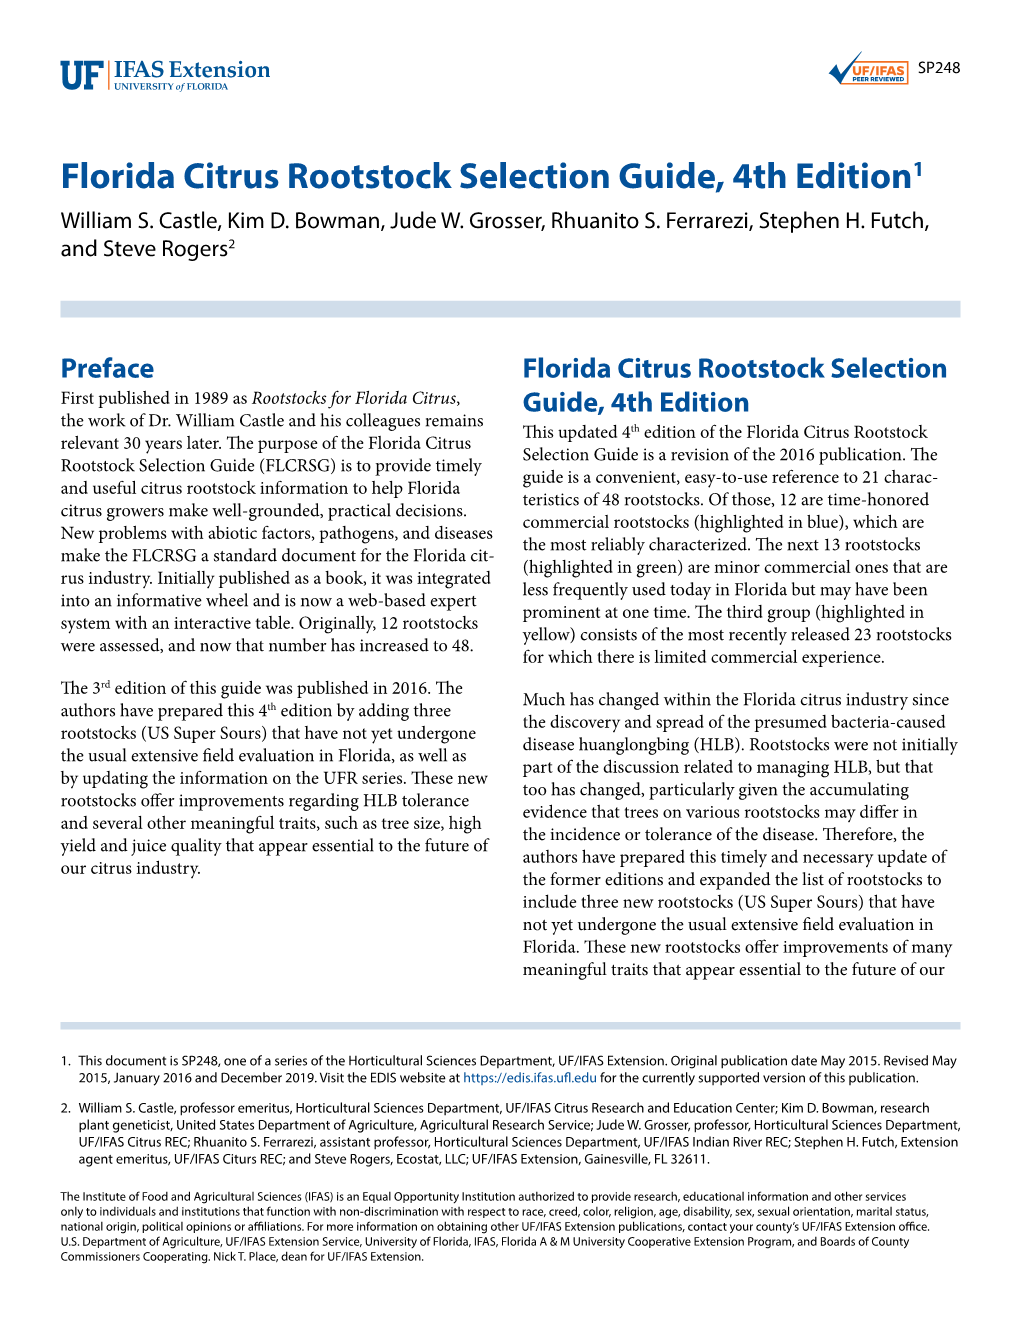 Florida Citrus Rootstock Selection Guide, 4Th Edition1 William S